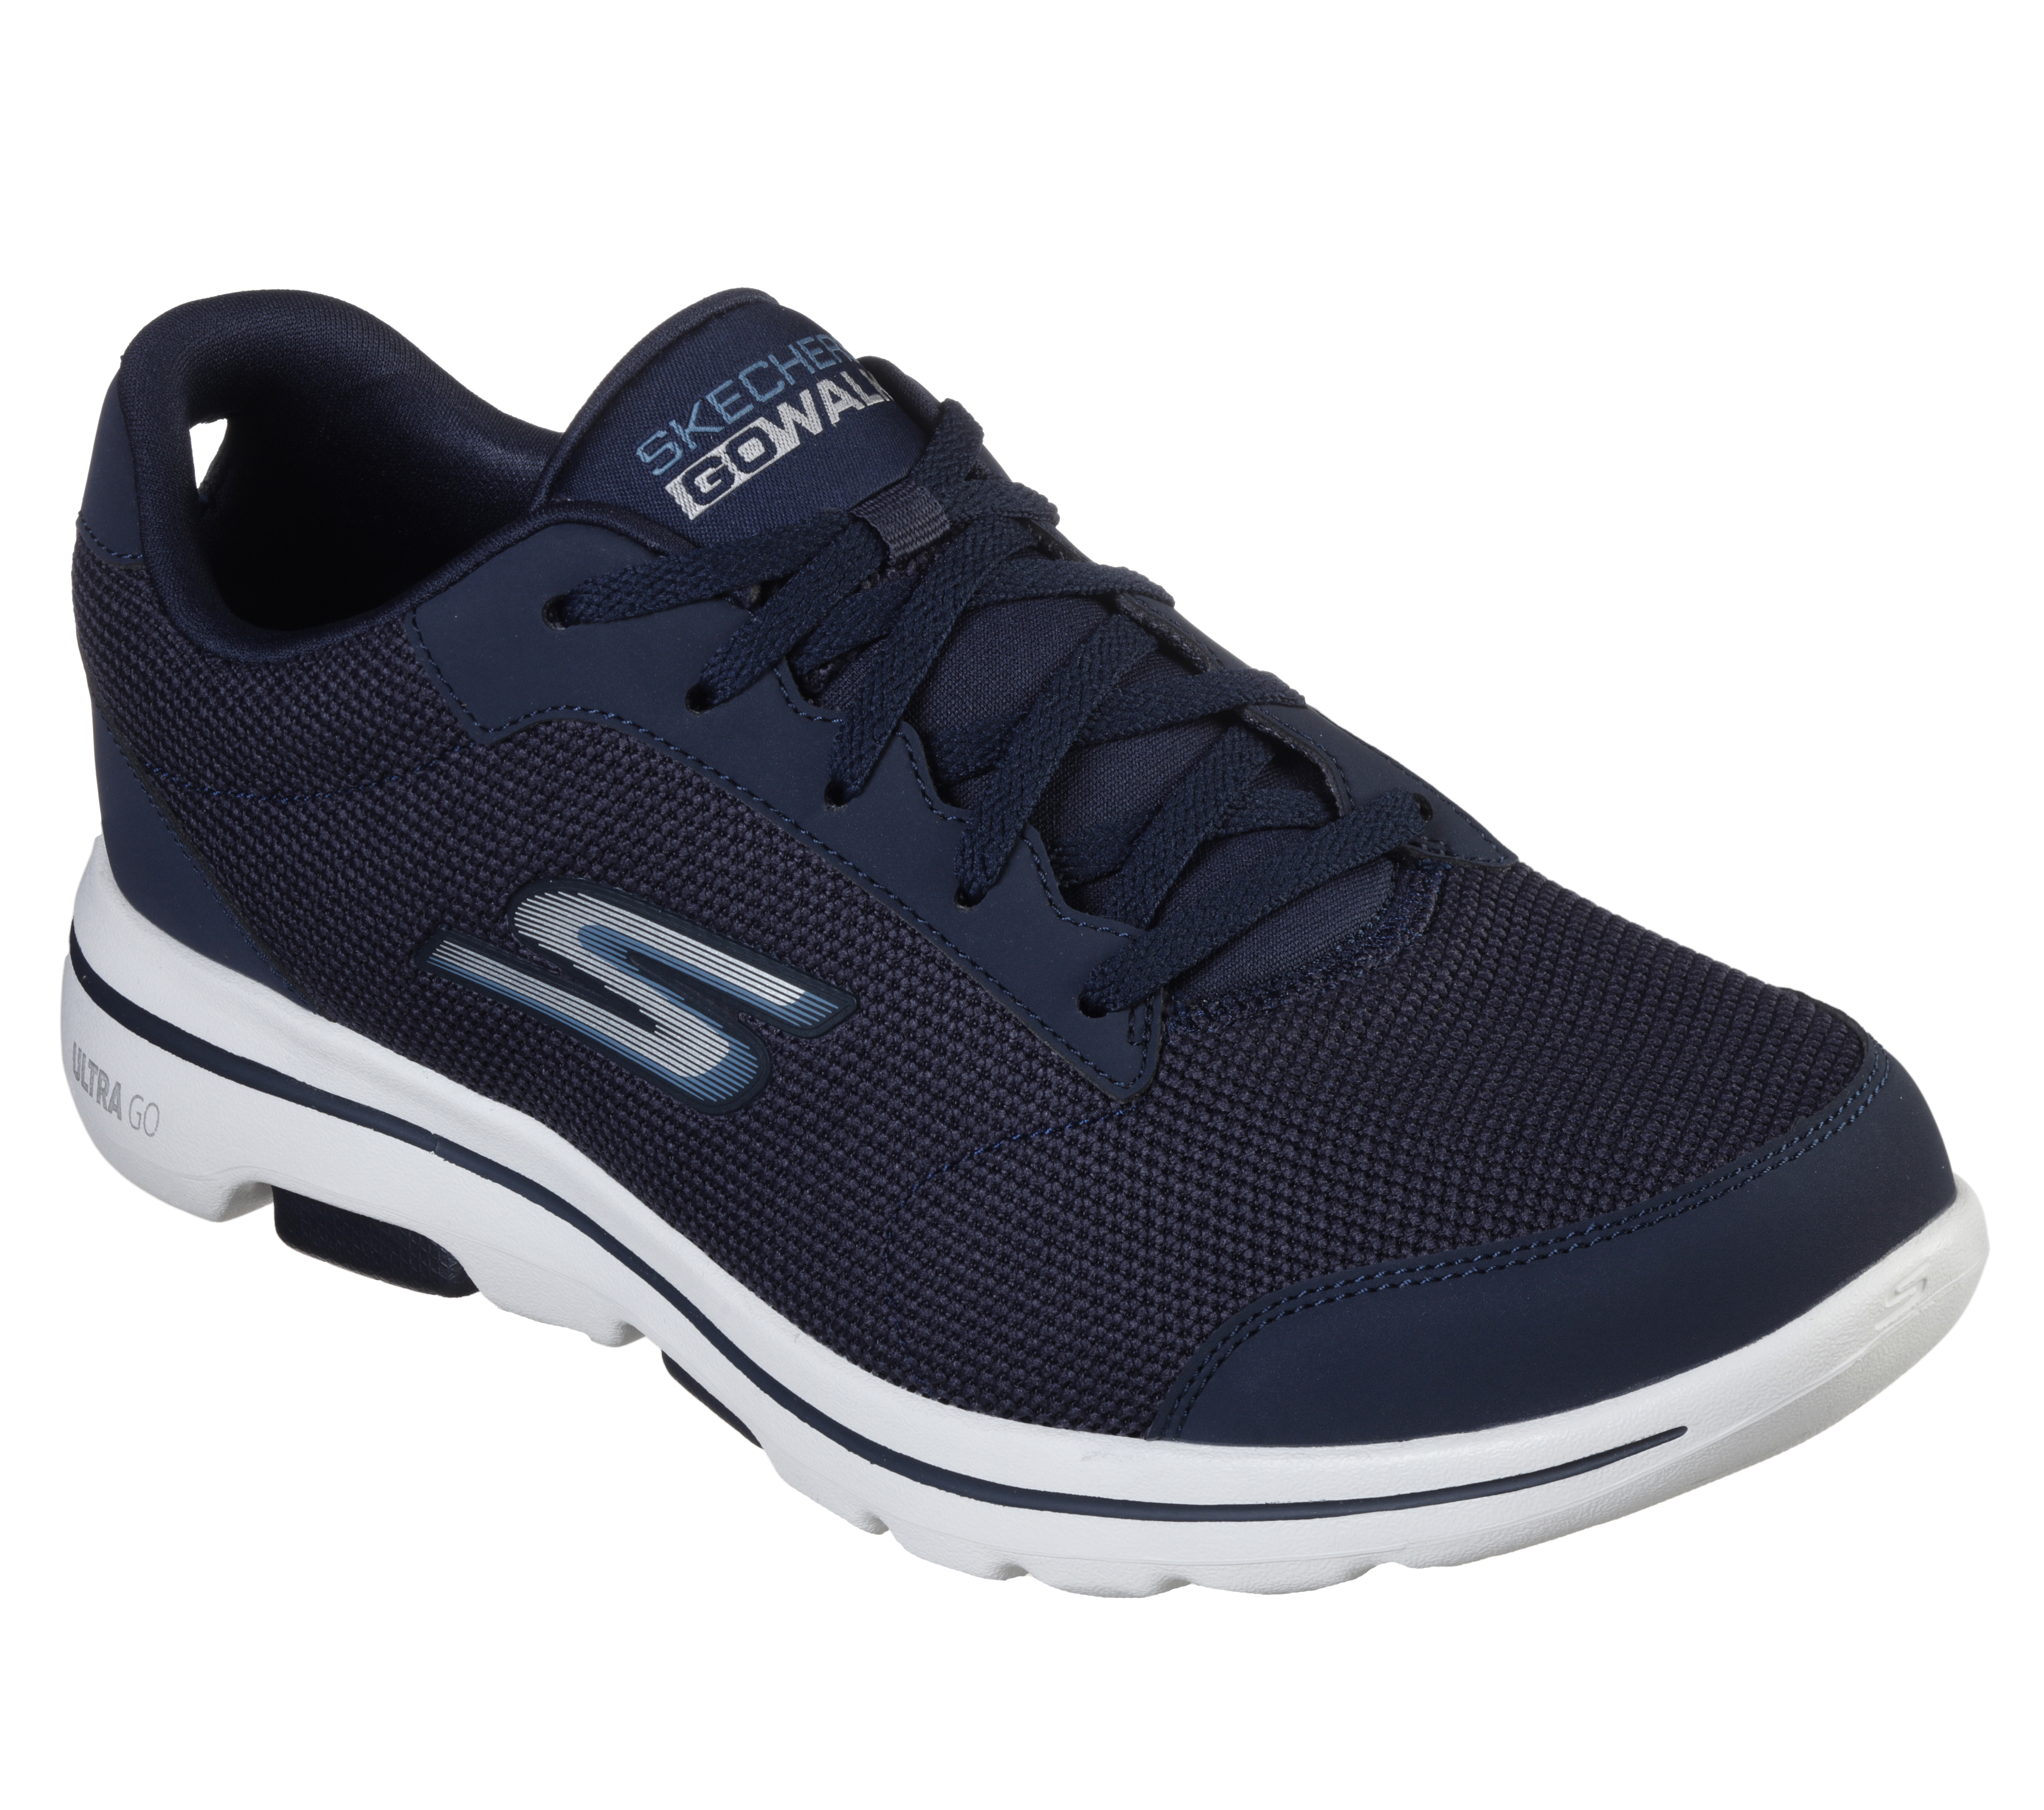 skechers with yoga mat insoles